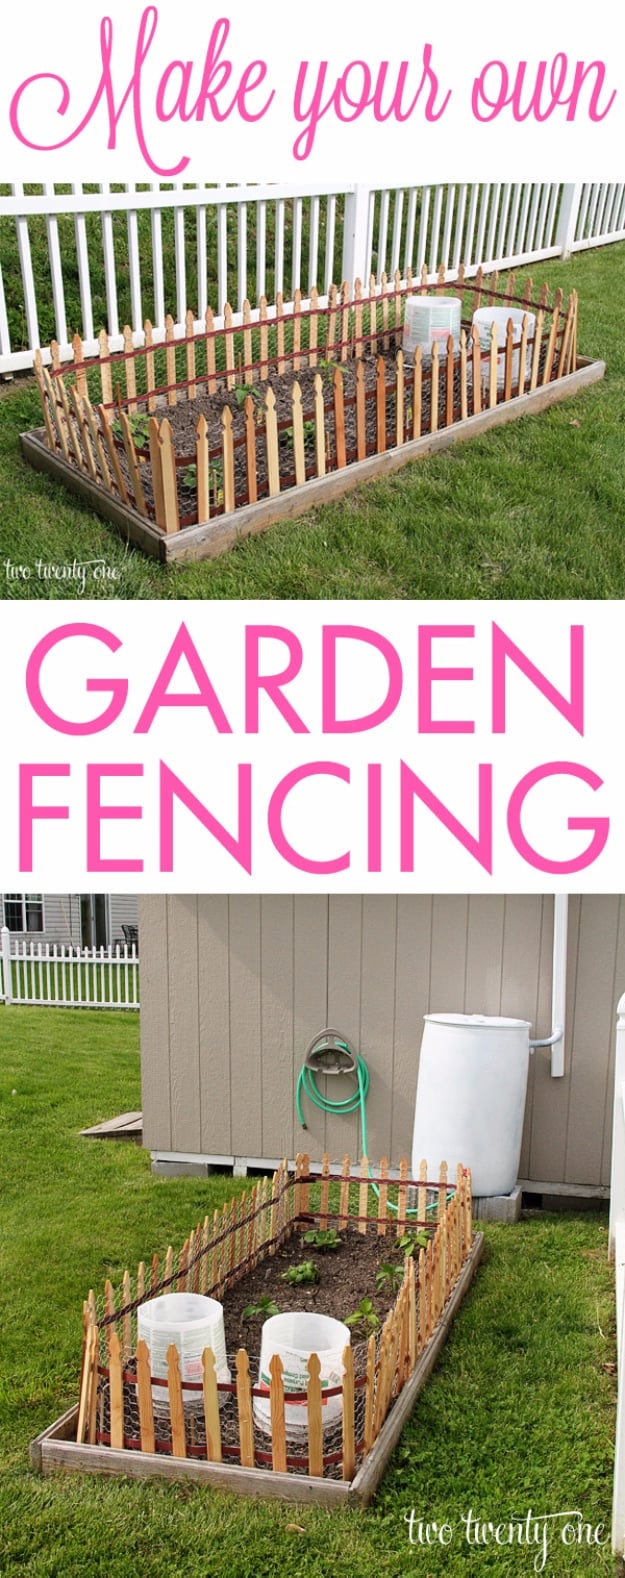 DIY Fences and Gates - Simple Garden Fence - How To Make Easy Fence and Gate Project for Backyard and Home - Step by Step Tutorial and Ideas for Painting, Updating and Making Fences and DIY Gate - Cool Outdoors and Yard Projects 